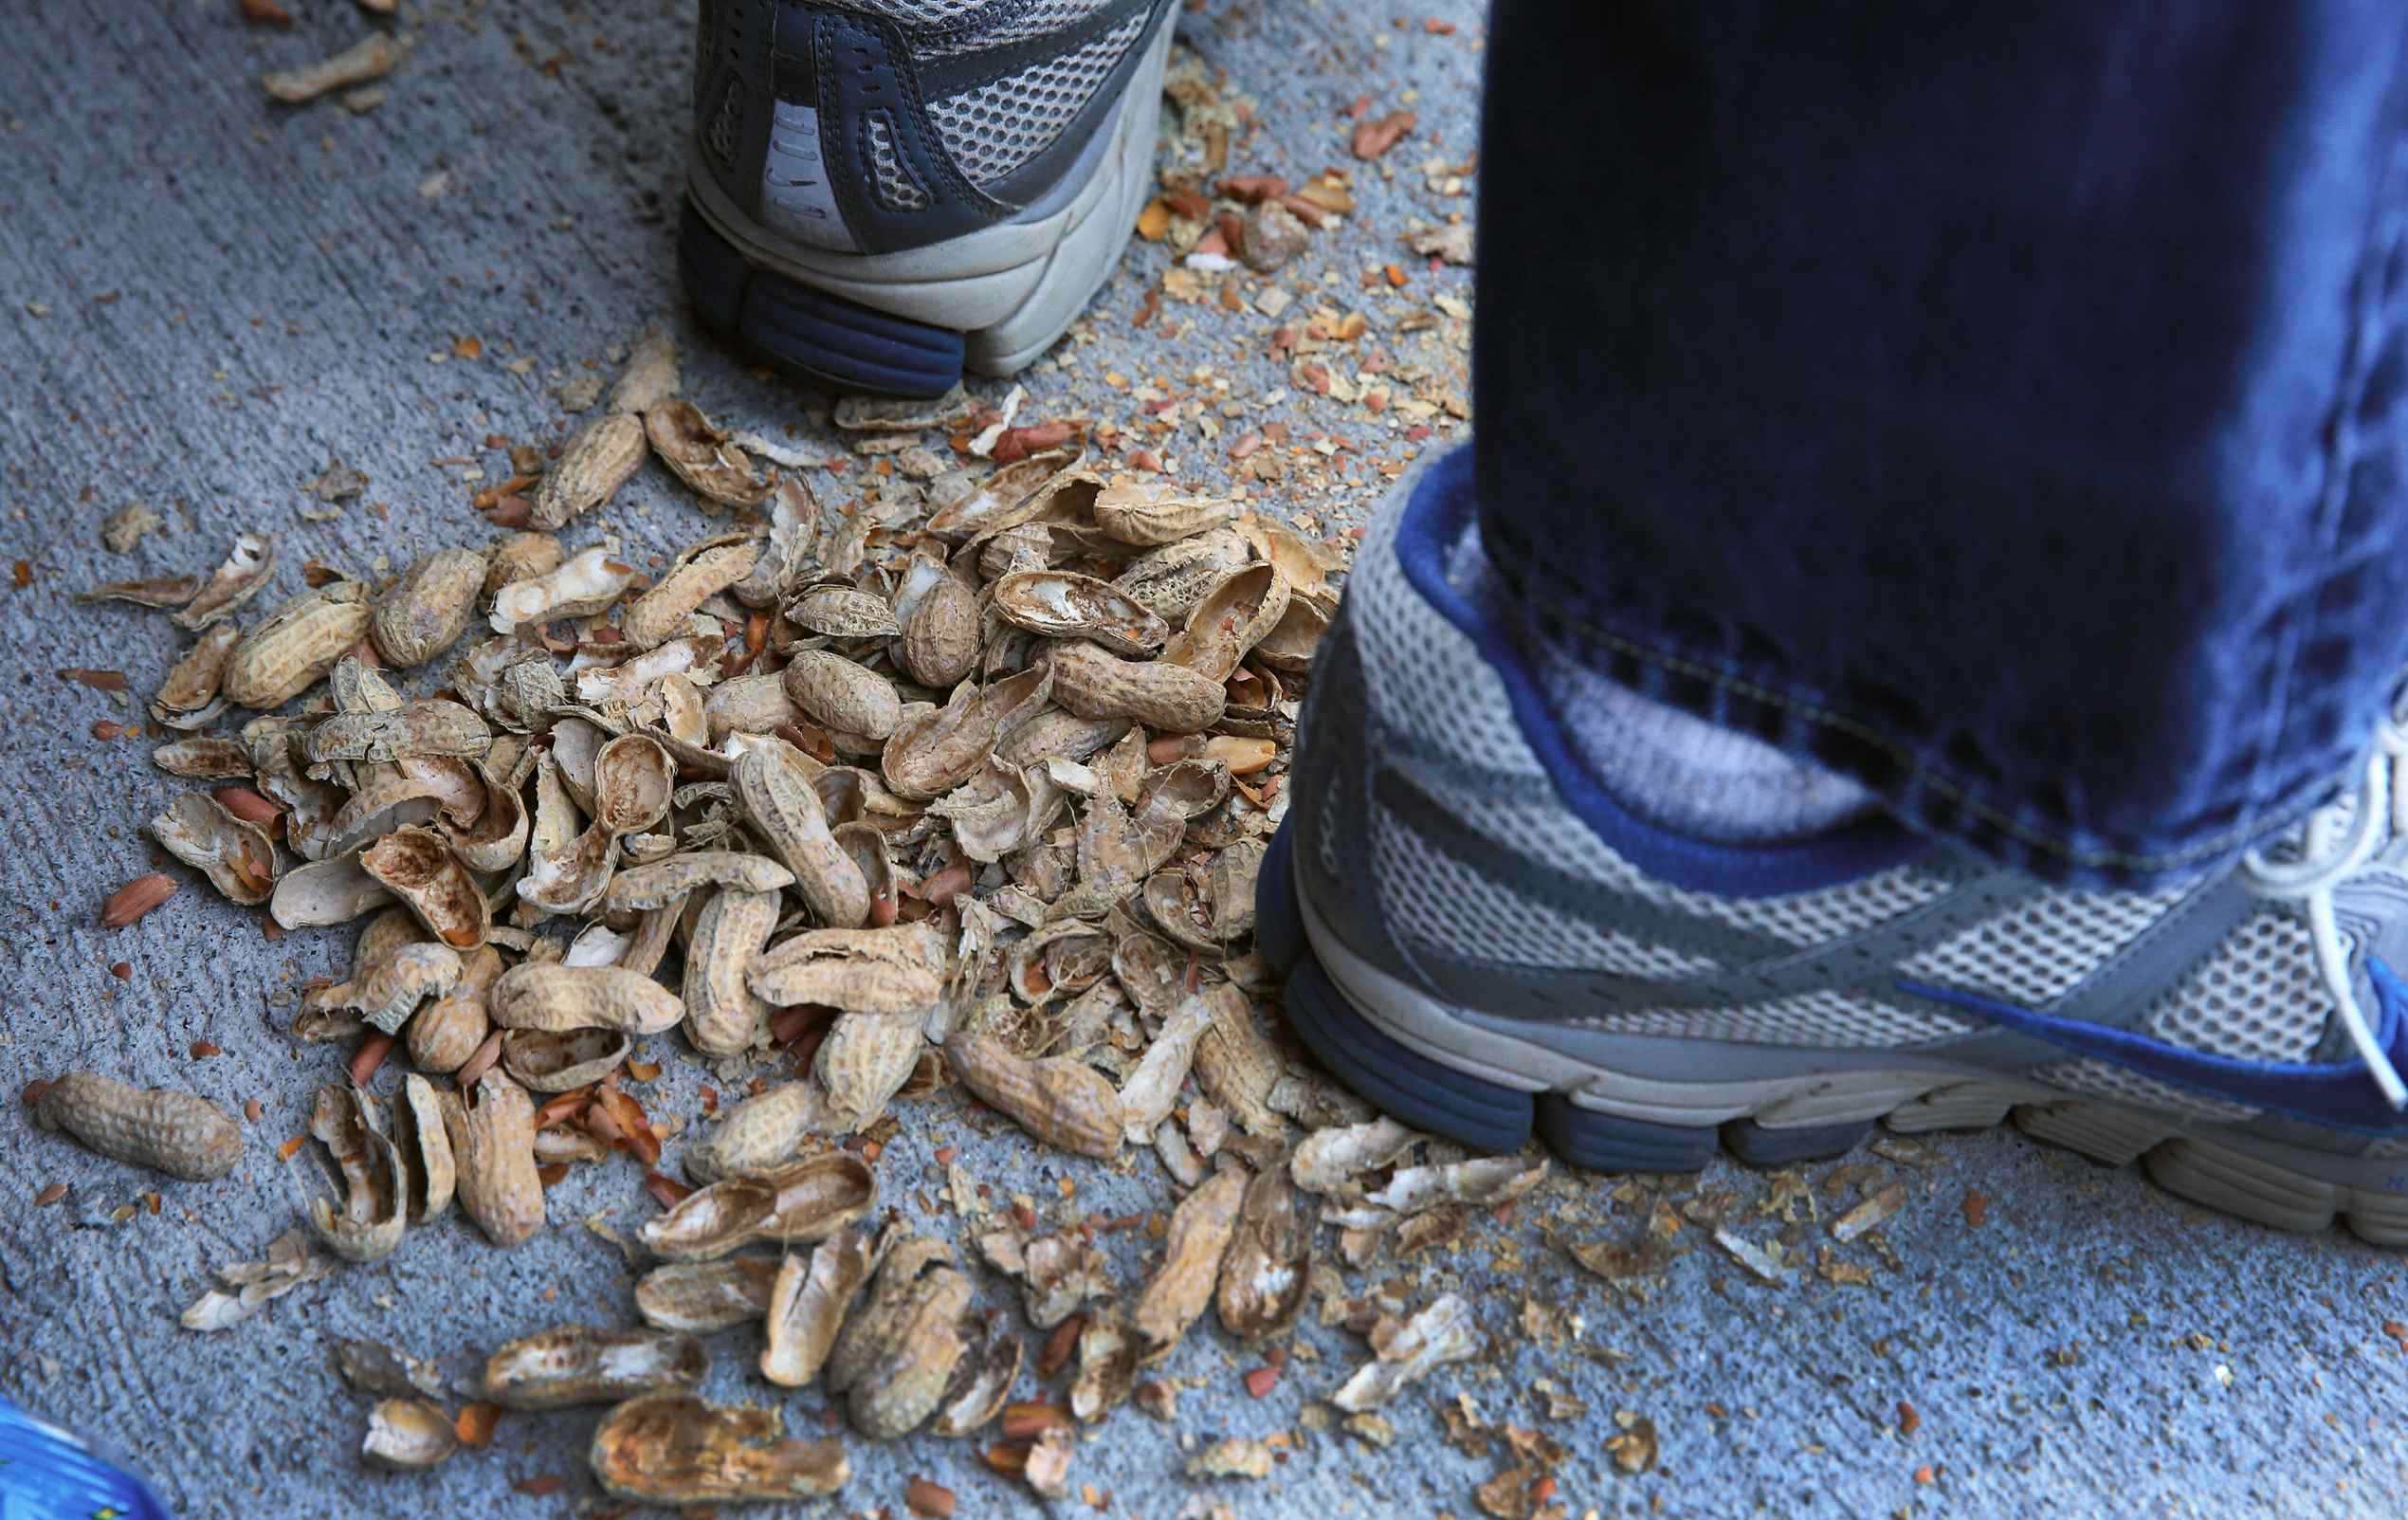 PHOTO: Empty peanut shells are seen beneath shoes during Opening Day at Fenway Park.